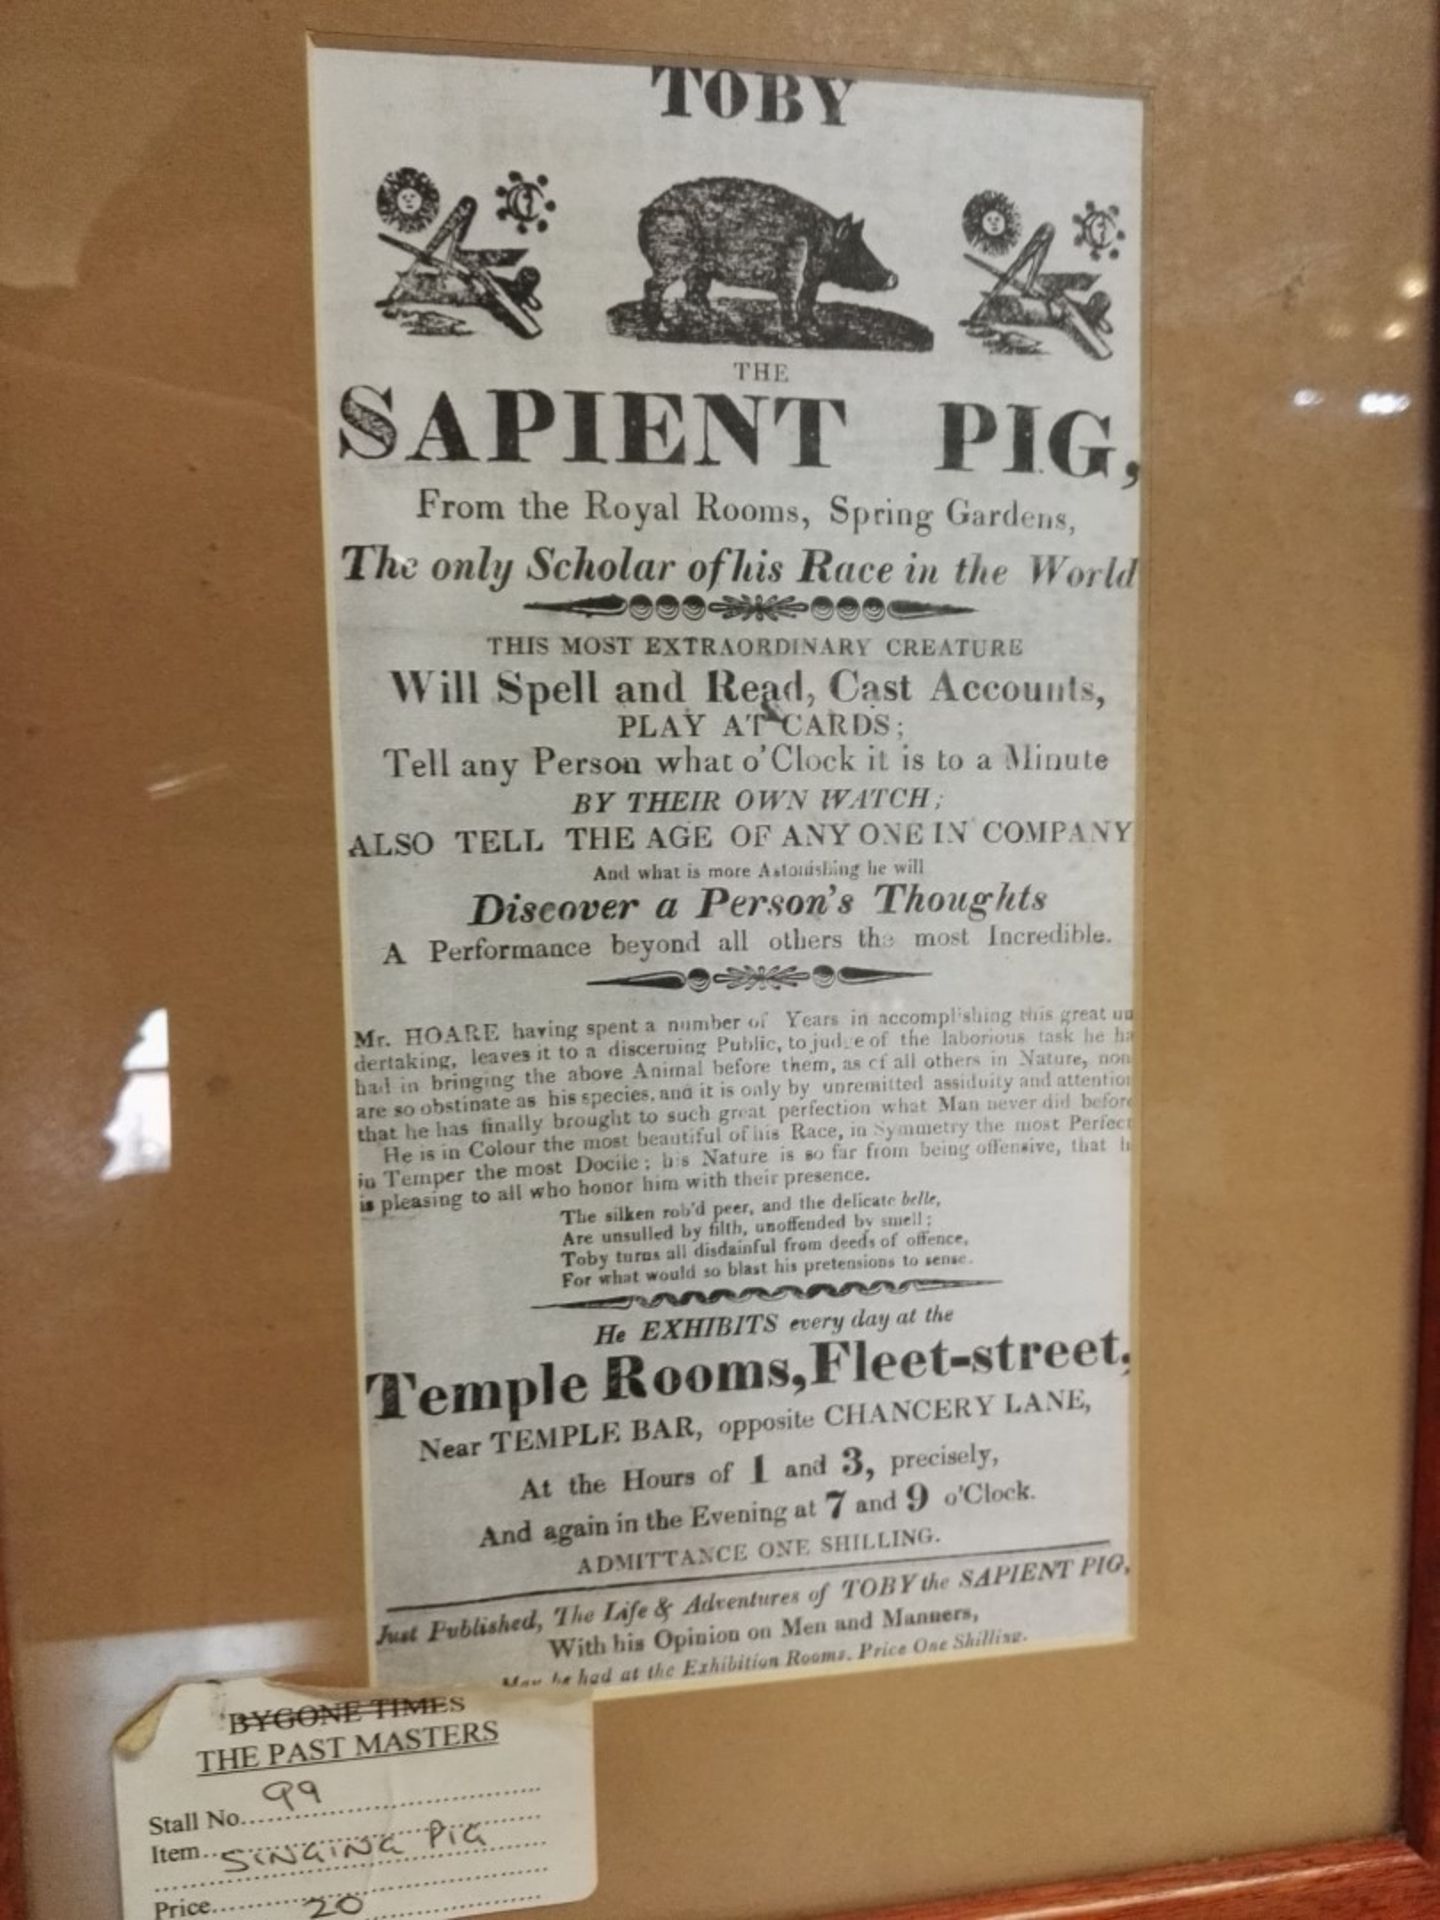 1 x Framed Picture With Toby The Sapient Pig Advertisement - 37 x 27 cms - M551 3F - CL351 - - Image 2 of 2